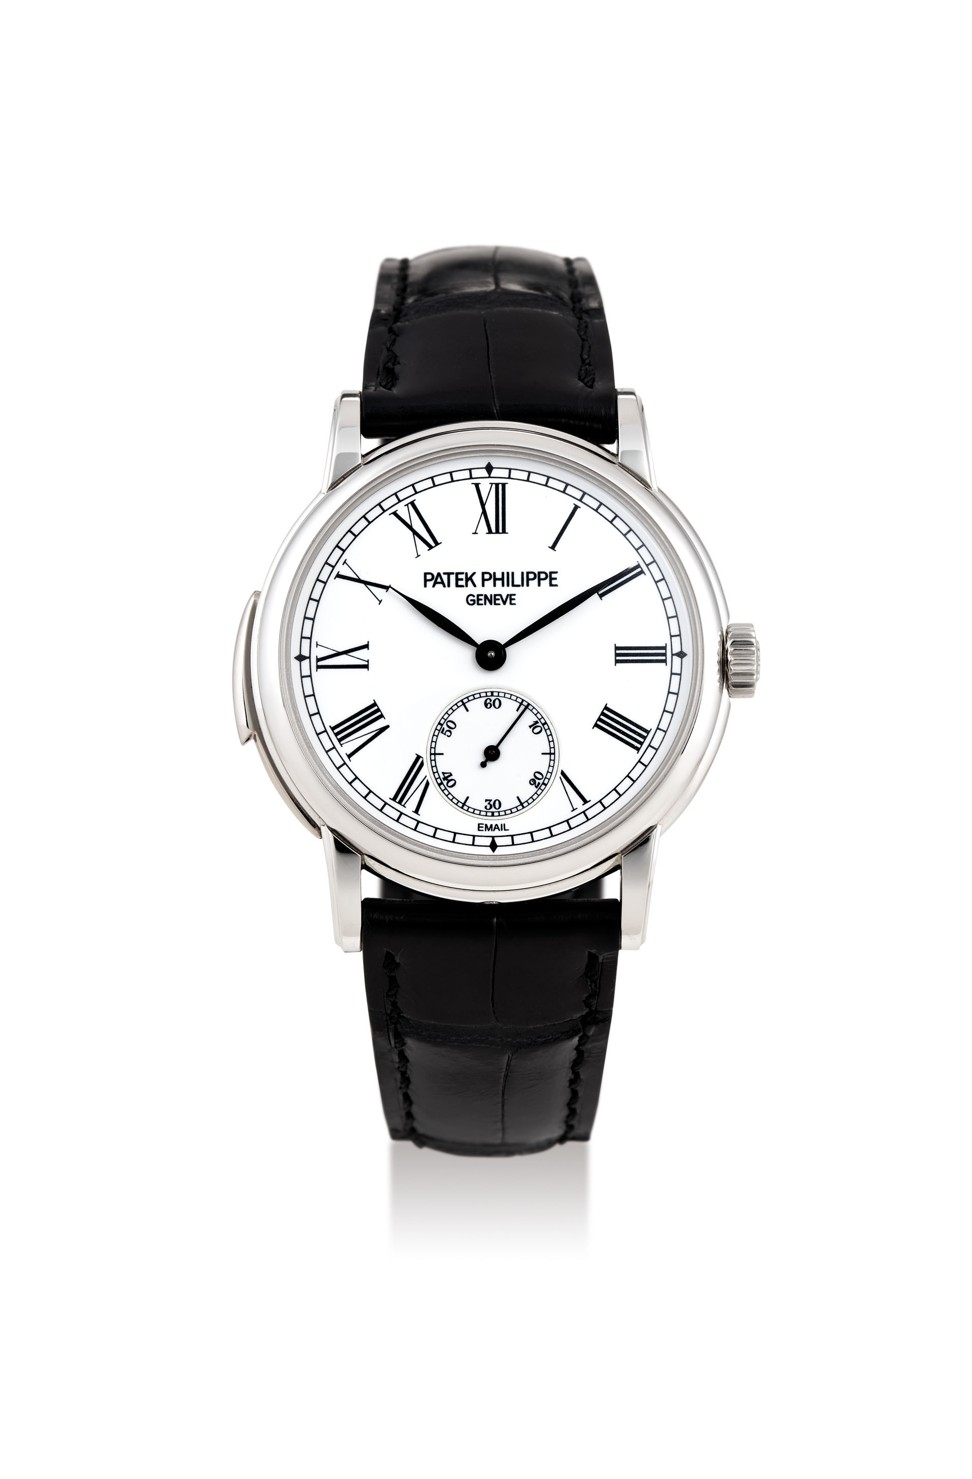 Lot 979, Patek Philippe, a rare platinum minute repeating wristwatch with enamel dial, complete with additional caseback, original presentation box, certificate.